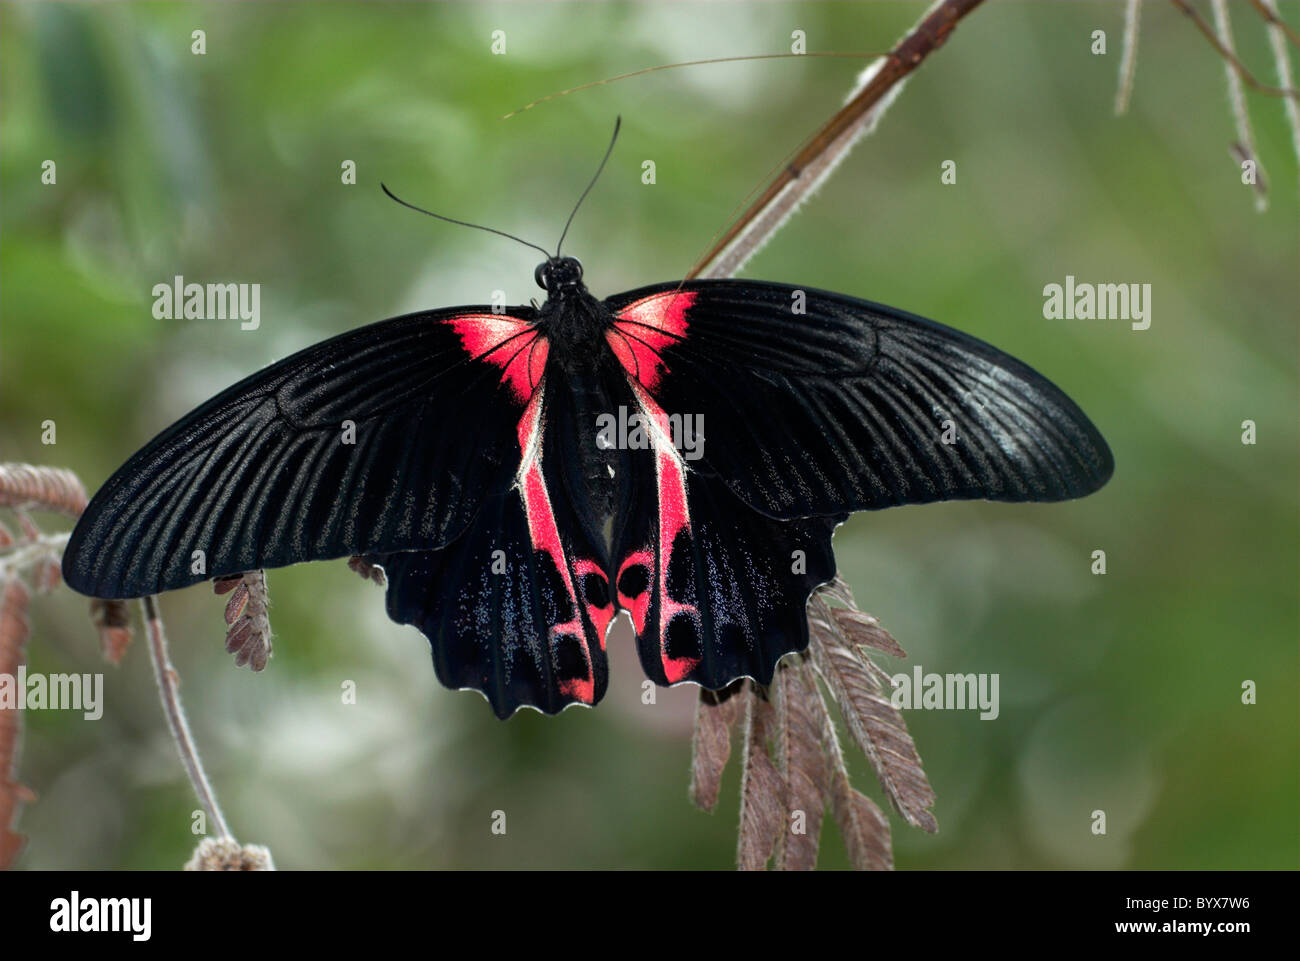 Scarlet Swallowtail Butterfly Papilio rumanzovia Asie Banque D'Images